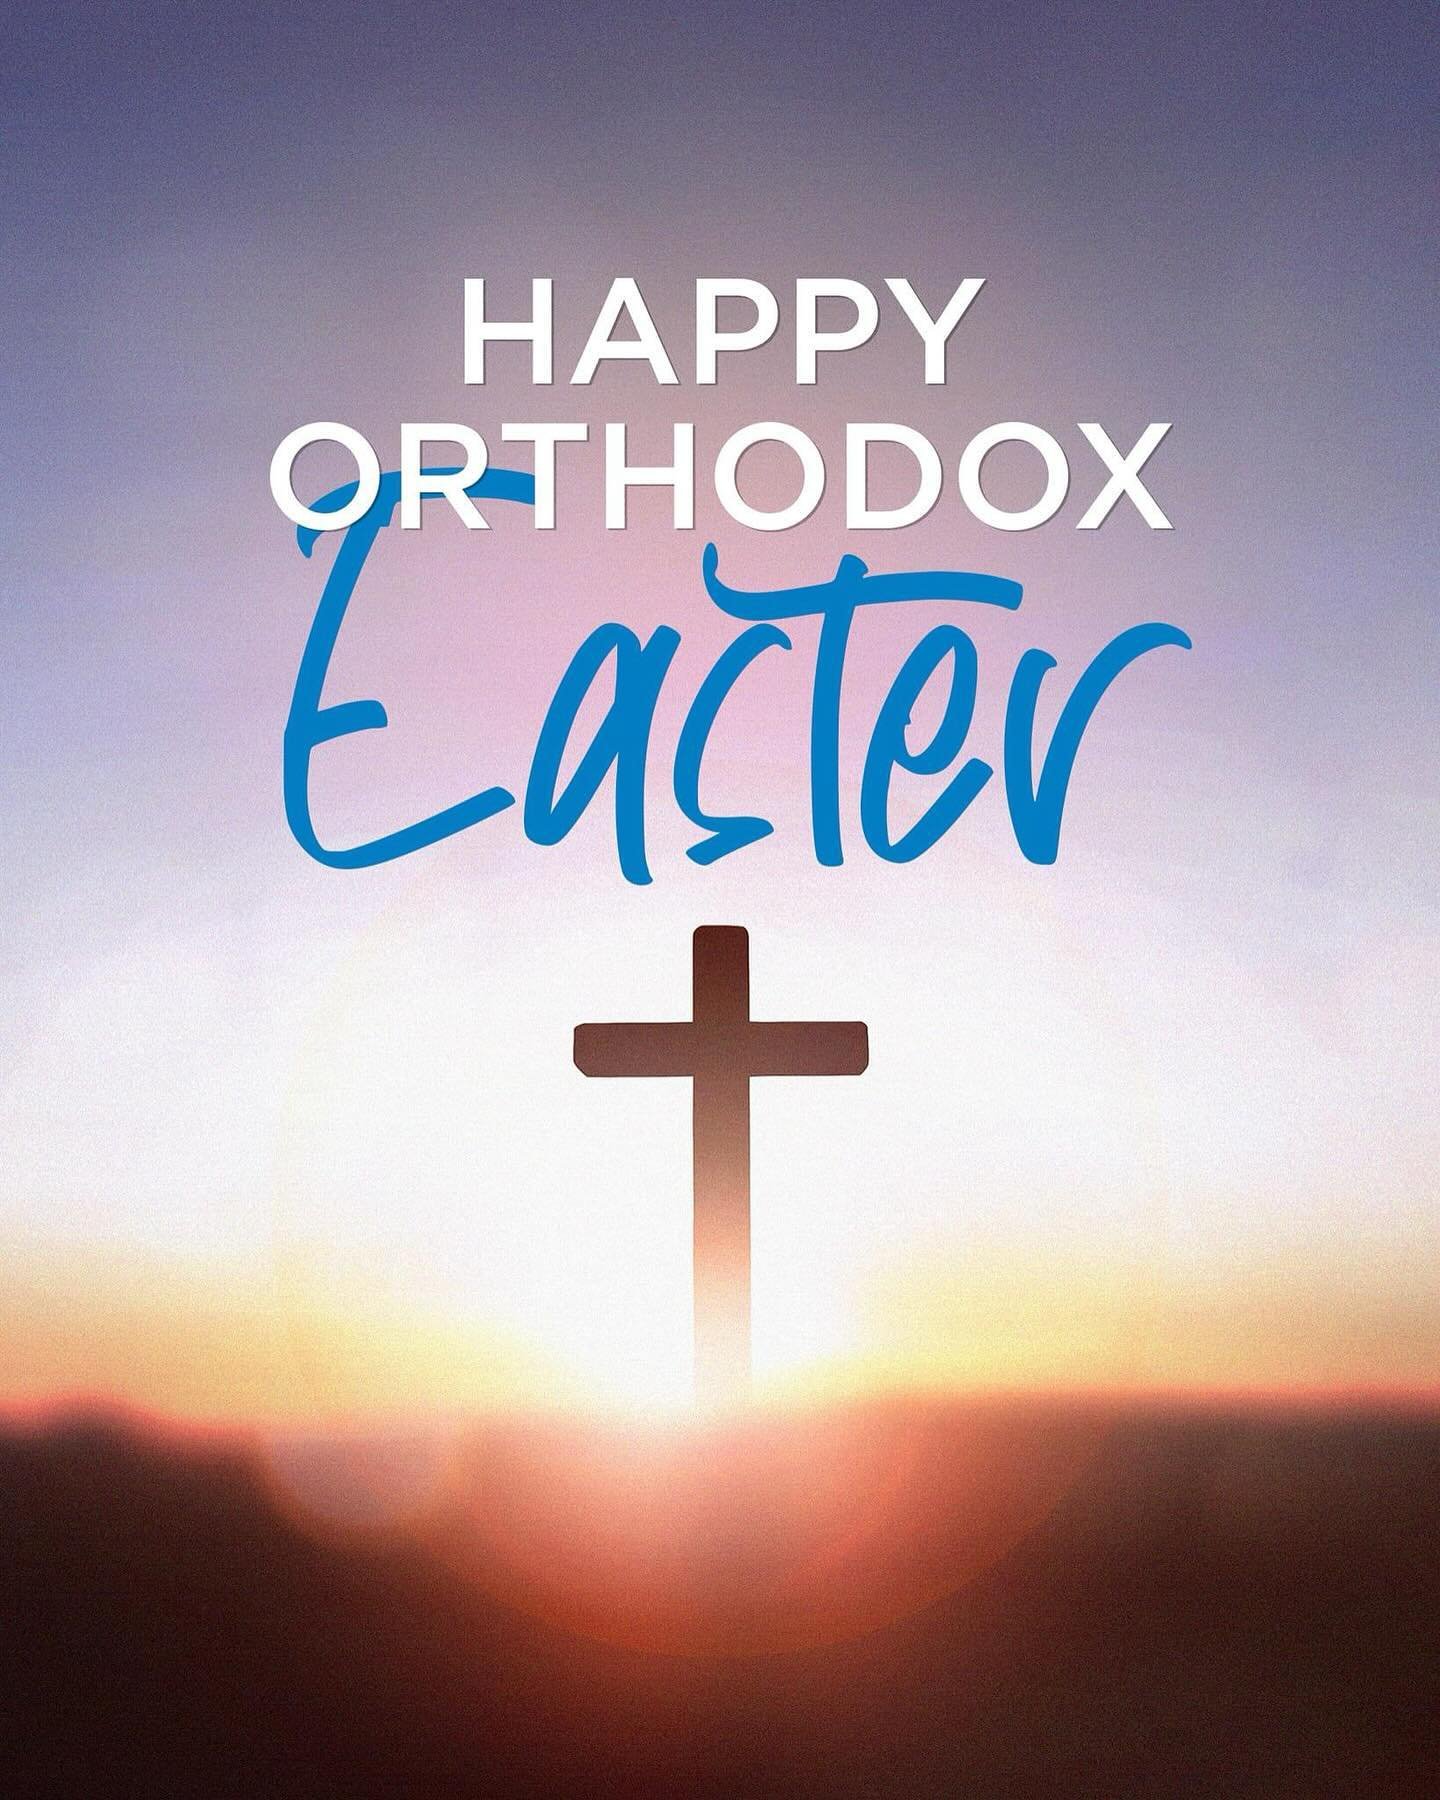 Best wishes to our Orthodox Christian community on Orthodox Easter Day🙏